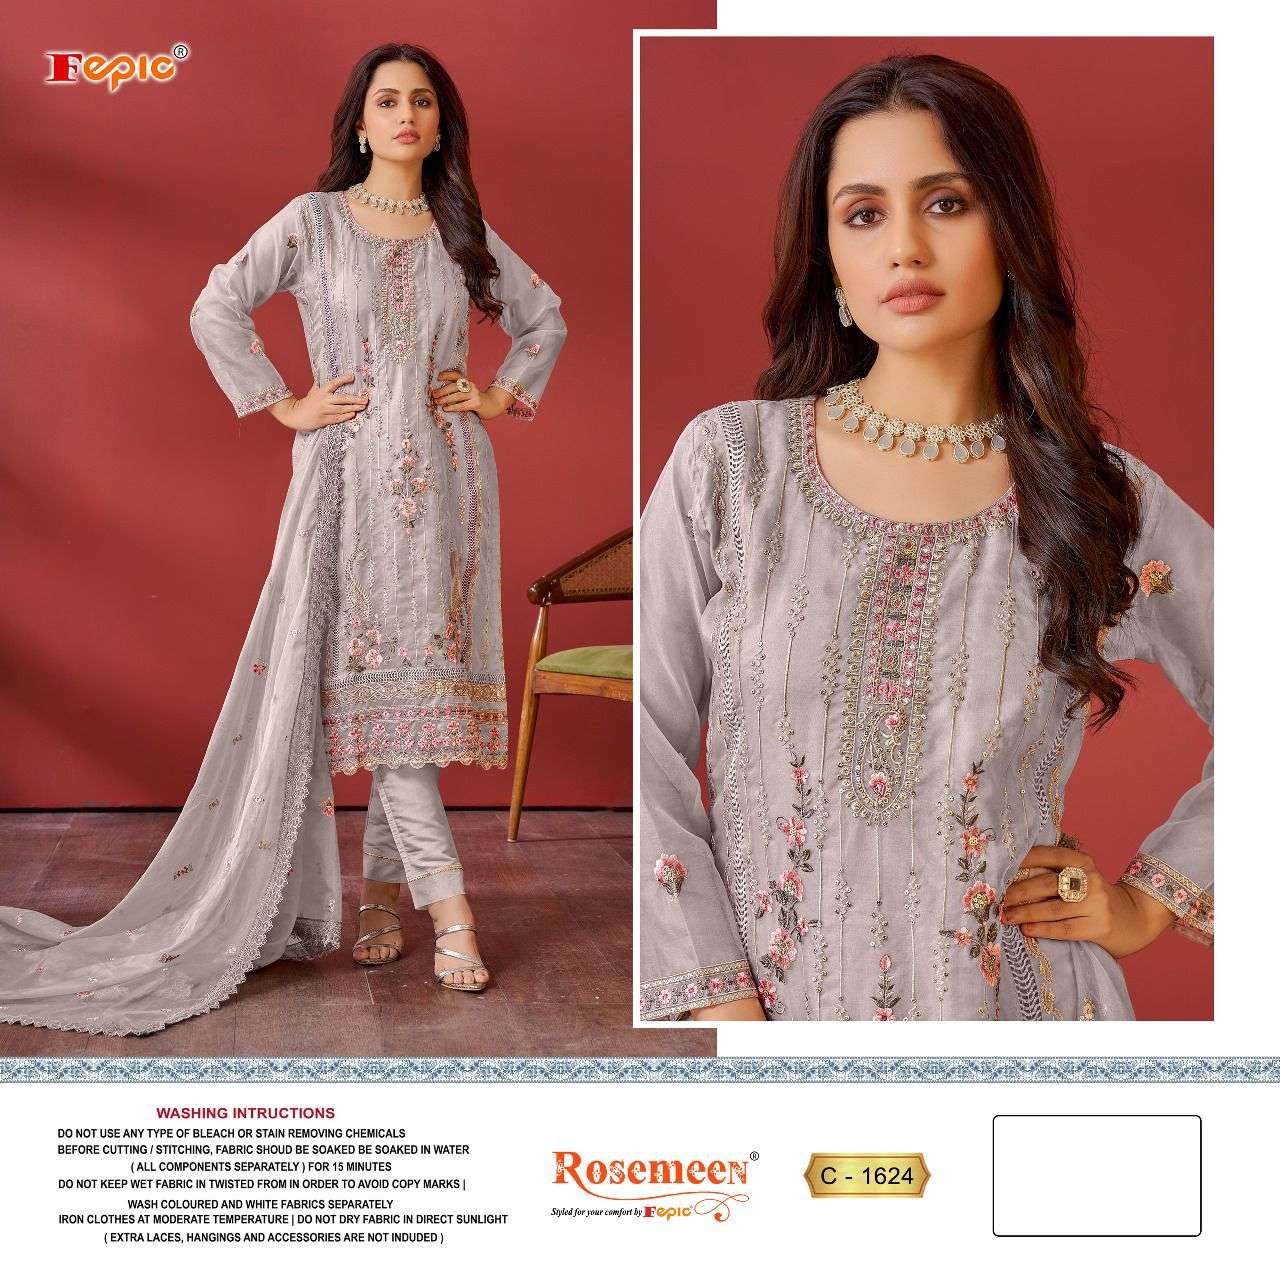 Fepic Rosemeen 1624 Organza With Embroidery work Pakistani s...